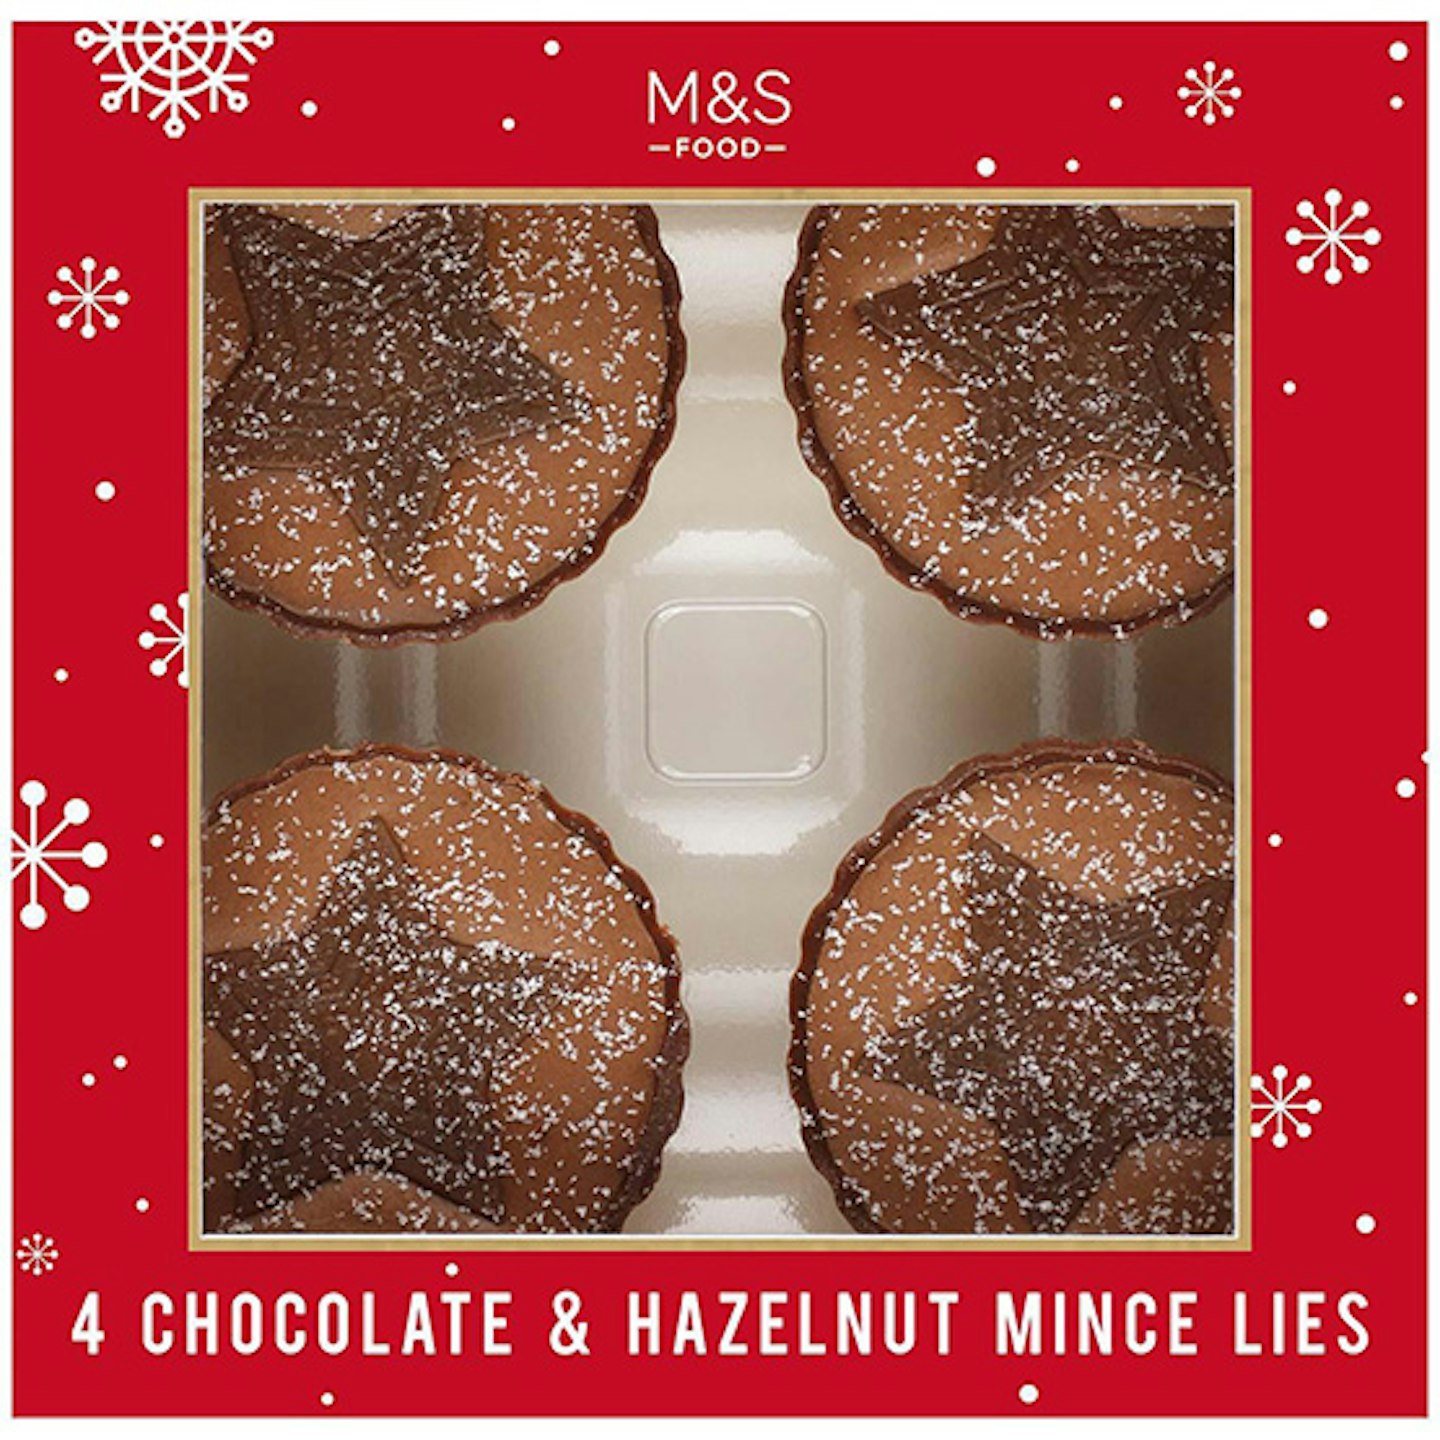 mands mince pies